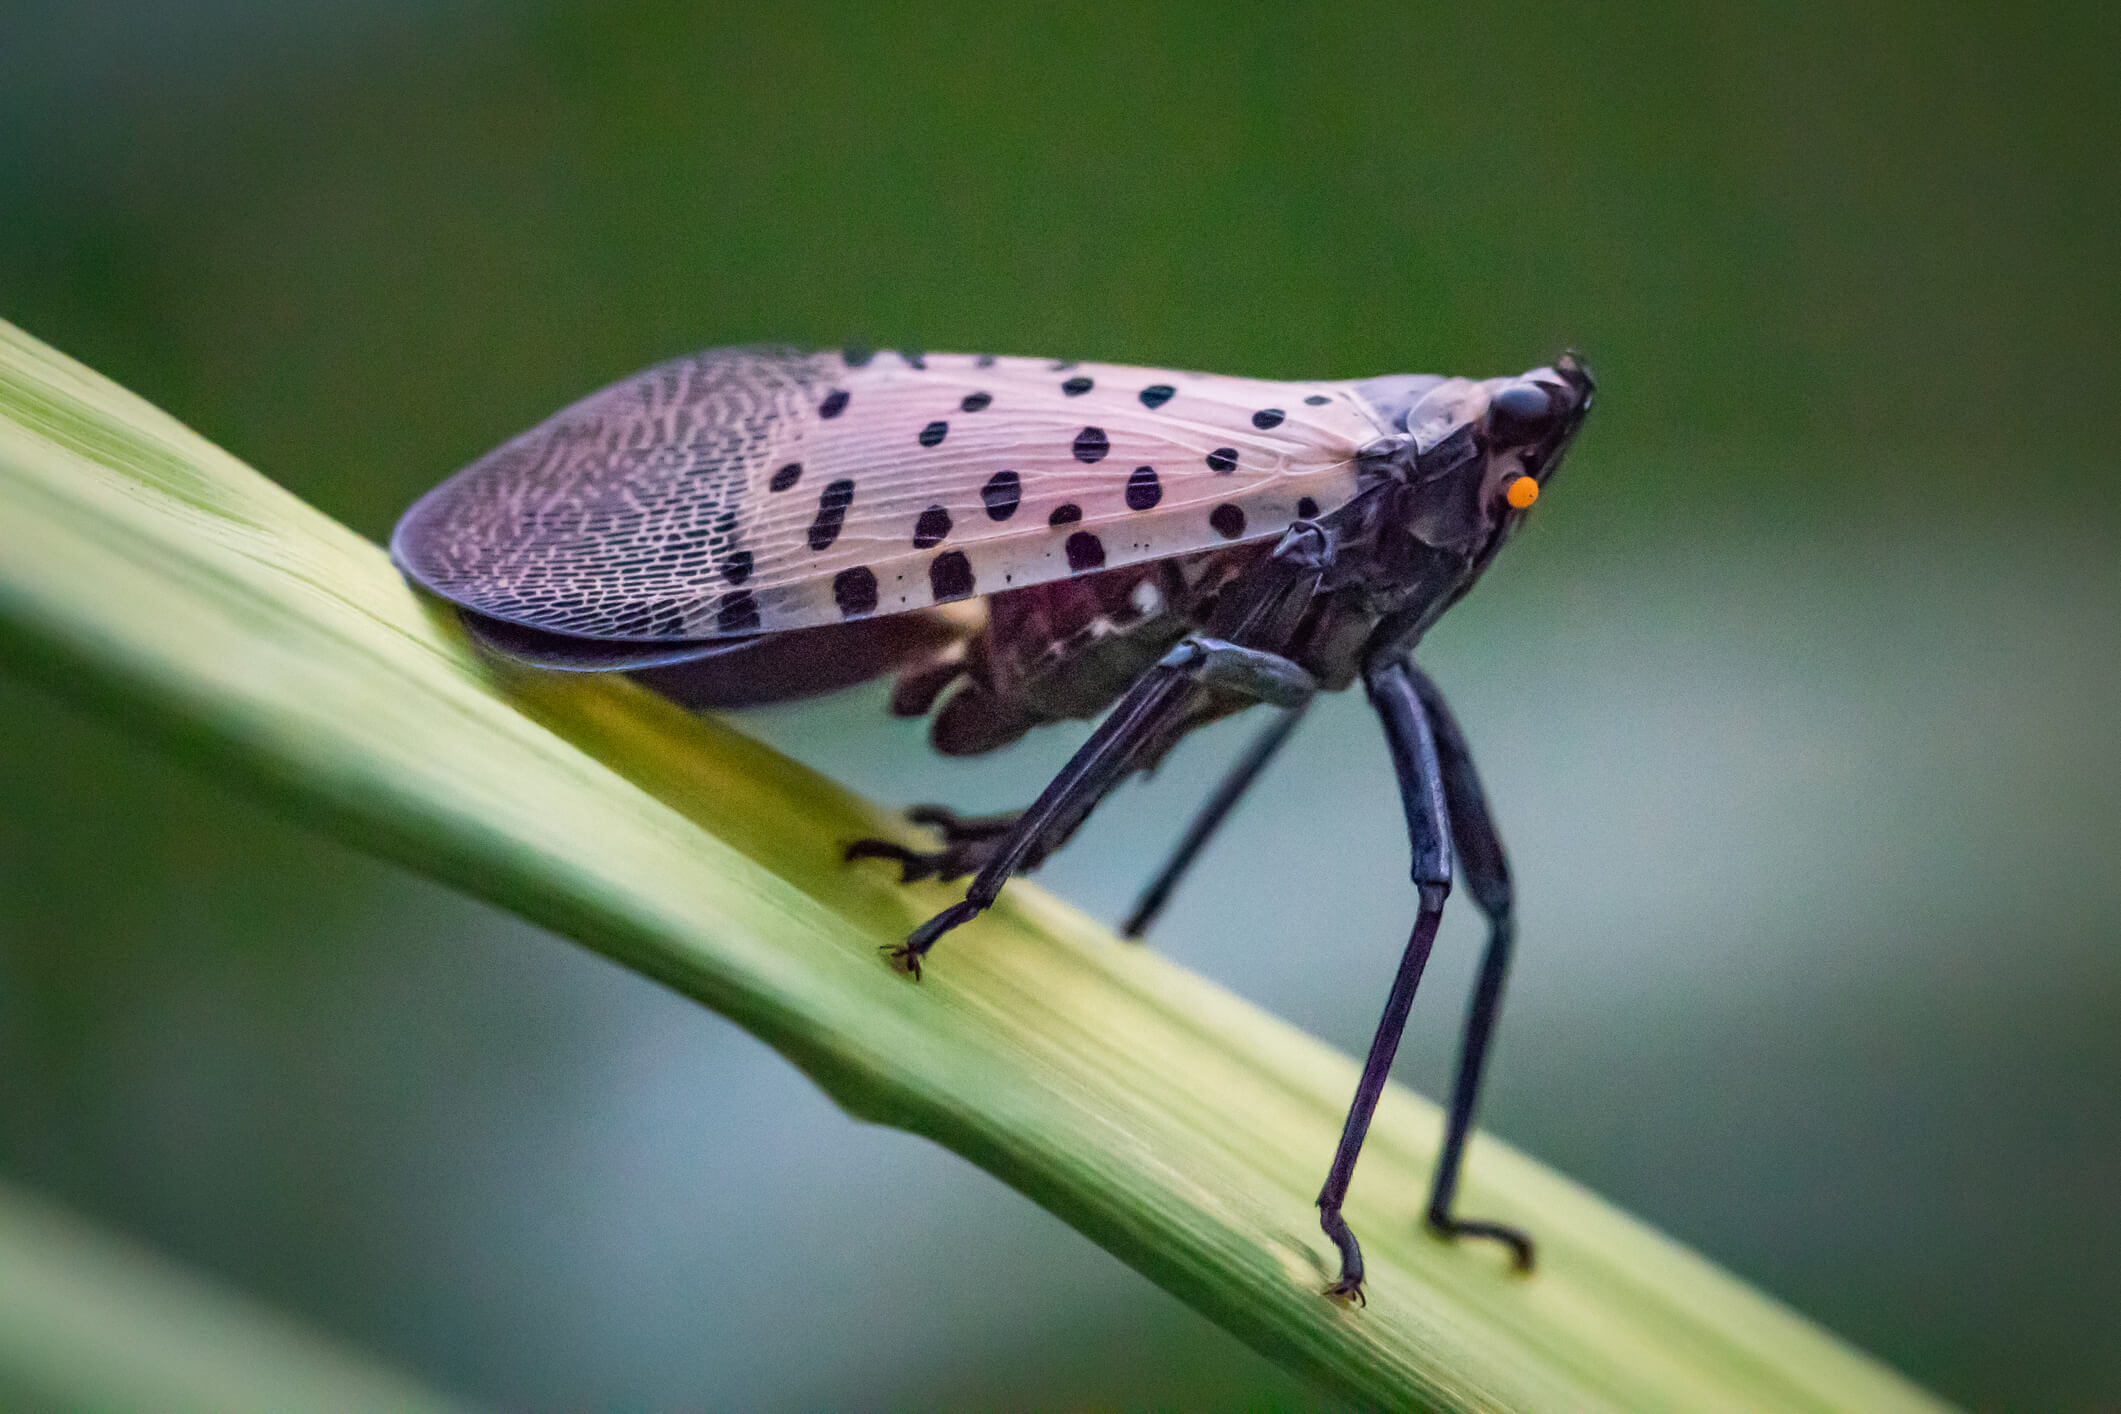 A Spotted Lanternfly ready to pounce